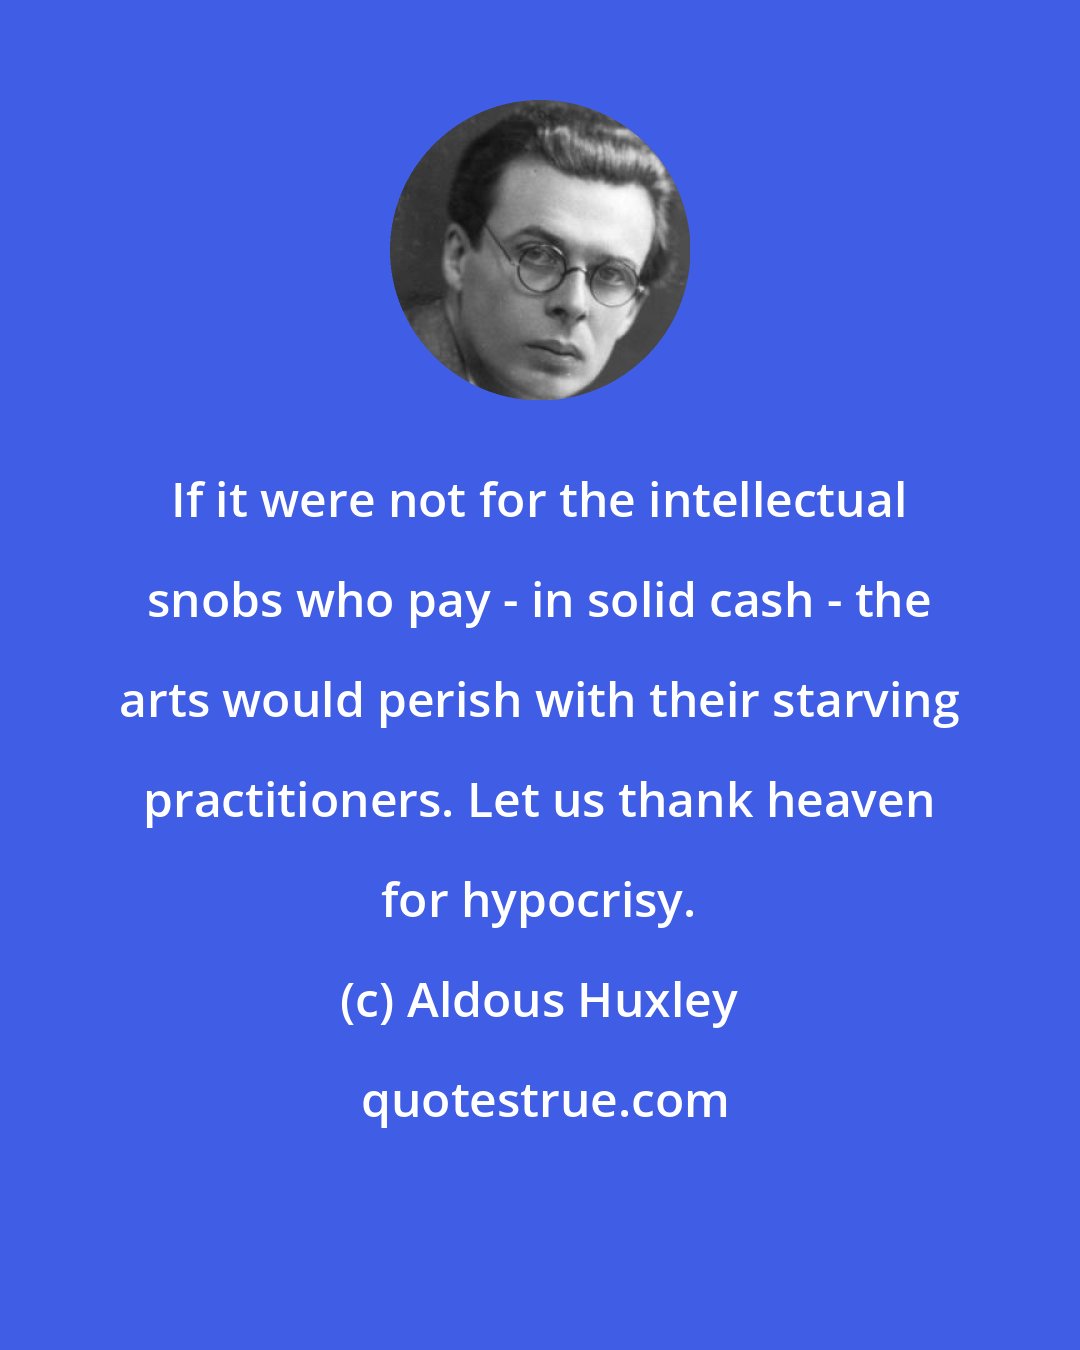 Aldous Huxley: If it were not for the intellectual snobs who pay - in solid cash - the arts would perish with their starving practitioners. Let us thank heaven for hypocrisy.